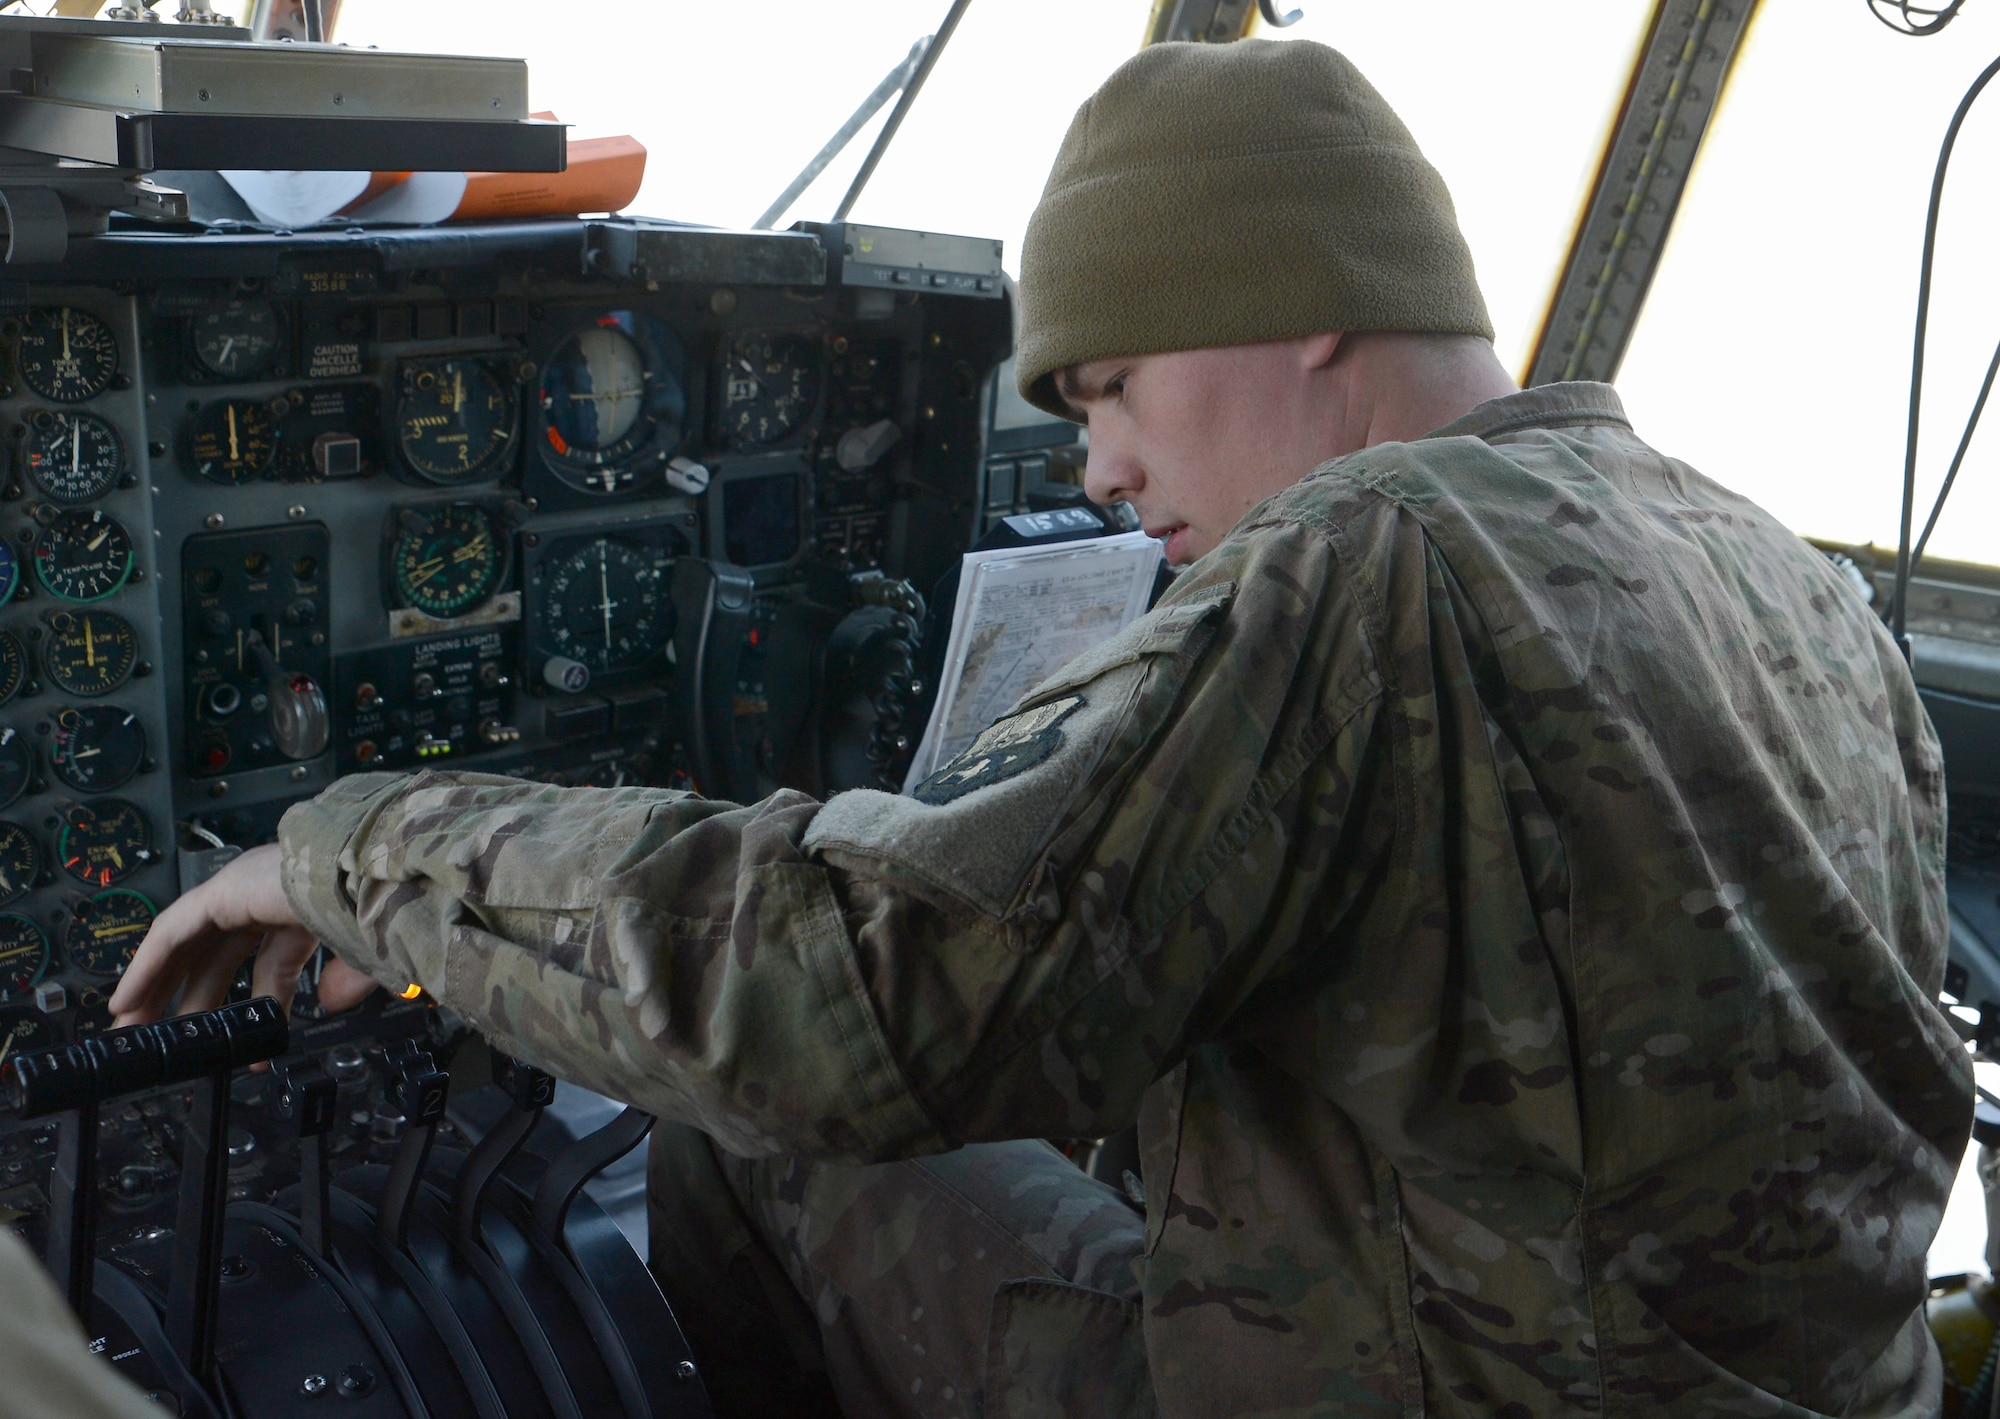 Senior Airman William Urquhart, 455th Expeditionary Aircraft Maintenance Squadron EC-130H Compass Call aerospace propulsion, checks engine functions on the EC-130H Feb. 2, 2018 at Bagram Airfield, Afghanistan.